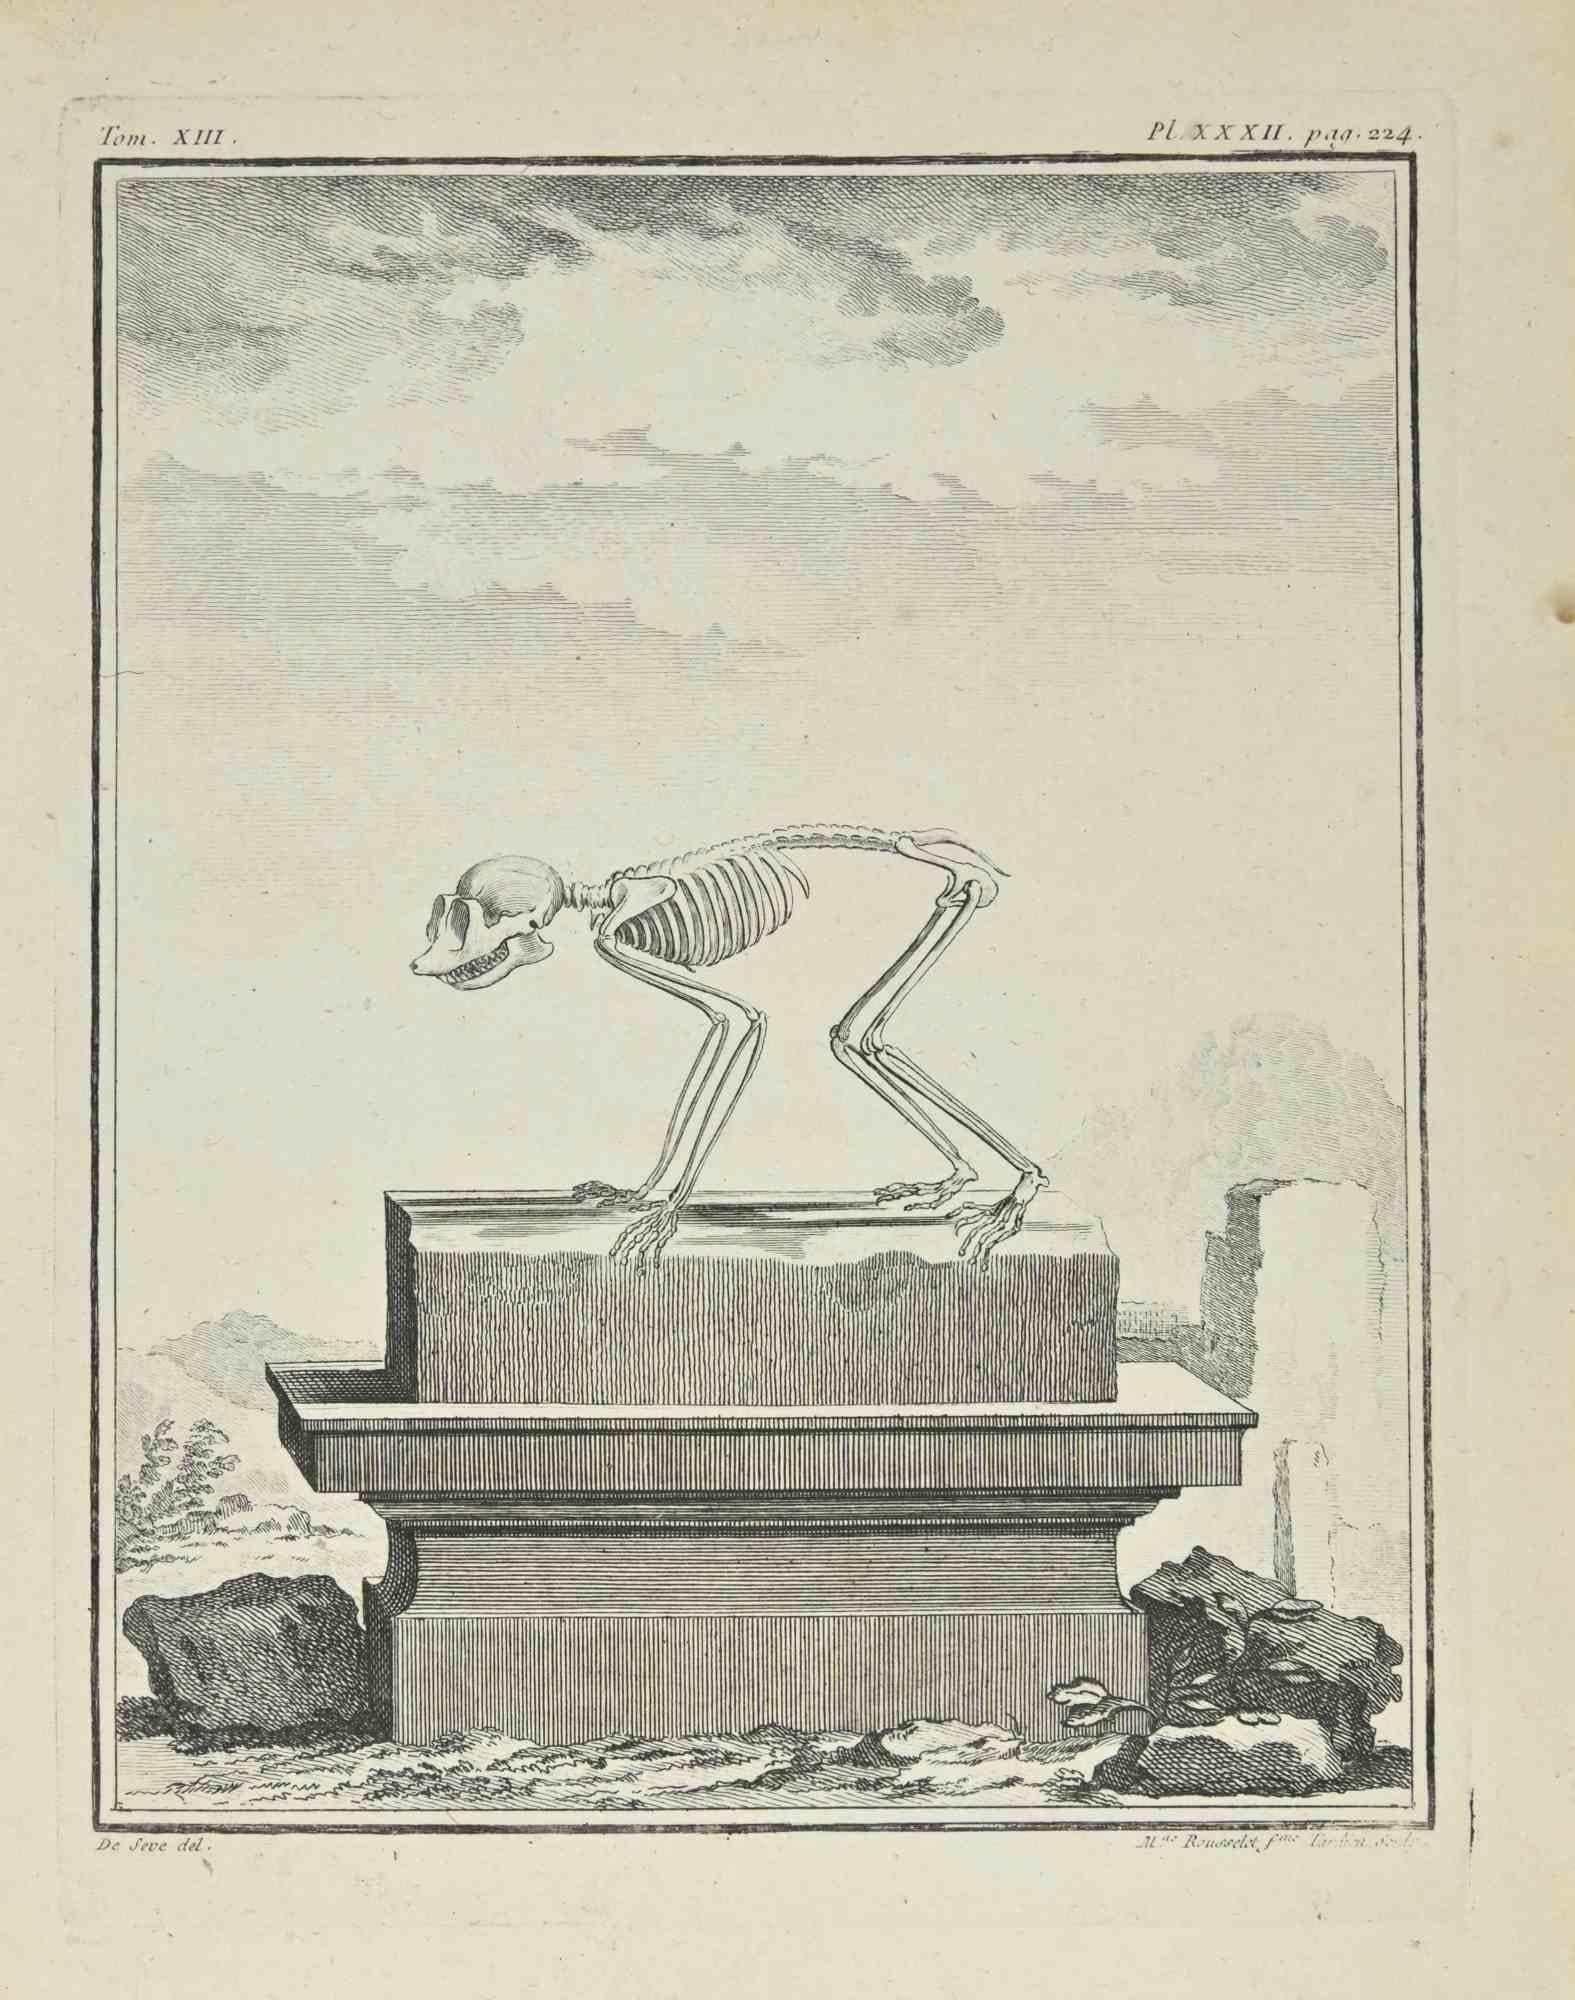 The Skeleton is an etching realized by Juste Madeline Rousselet in 1771.

It belongs to the suite "Histoire Naturelle de Buffon".

The Artist's signature is engraved lower right.

Good conditions